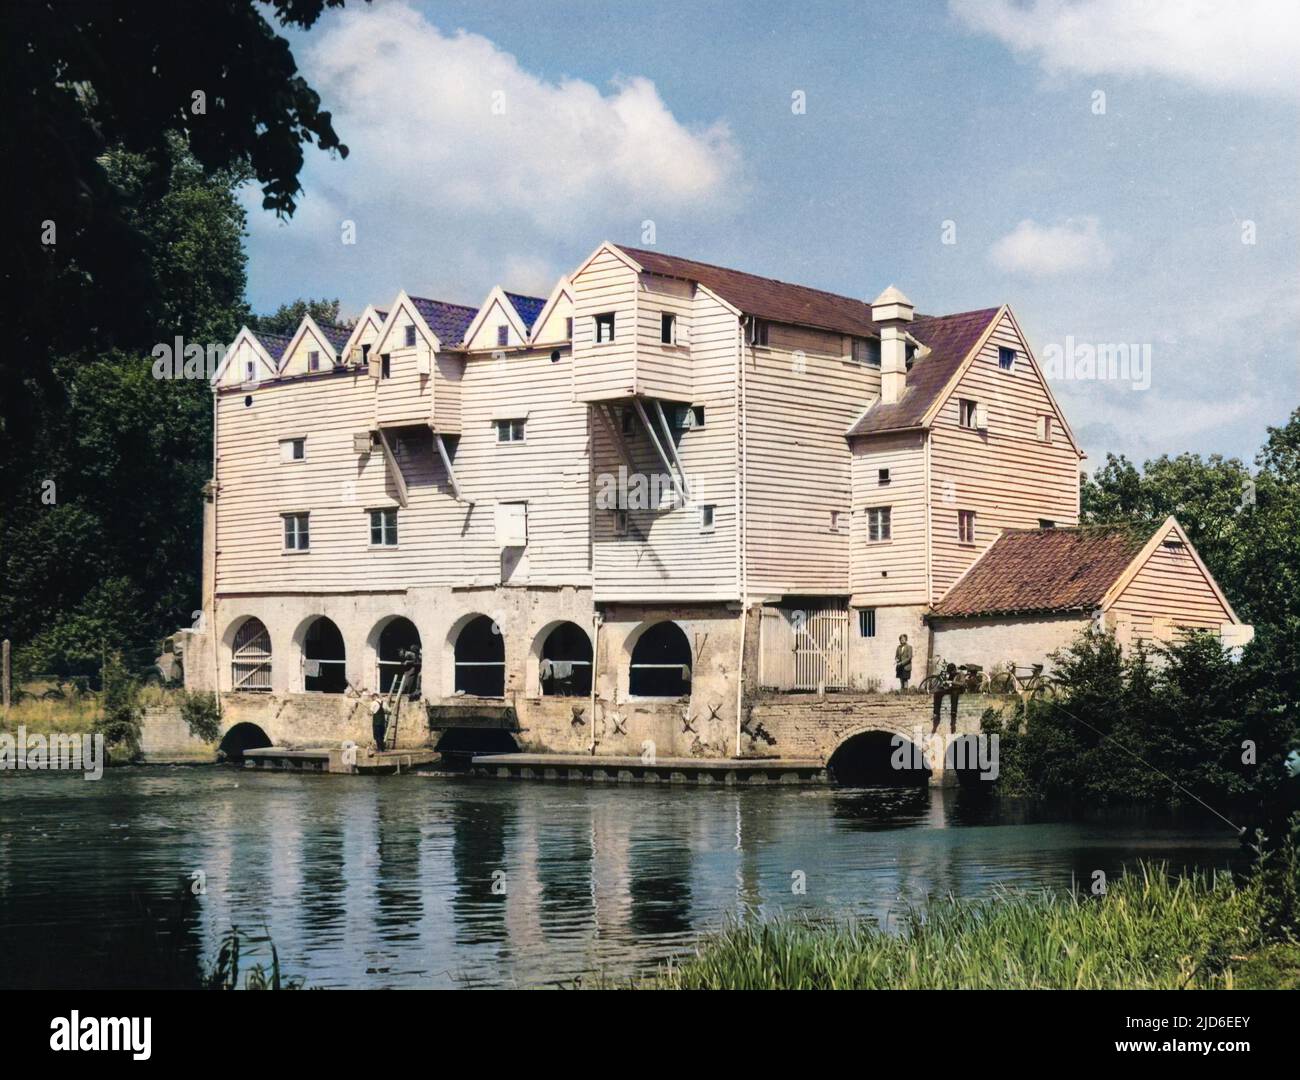 Horstead Watermill, on the River Bure, Norfolk, was one of the most beautiful weatherboarded wooden mills in England. Tragically destroyed by fire on 23 January 1963. Colourised version of : 10145945       Date: 1950s Stock Photo